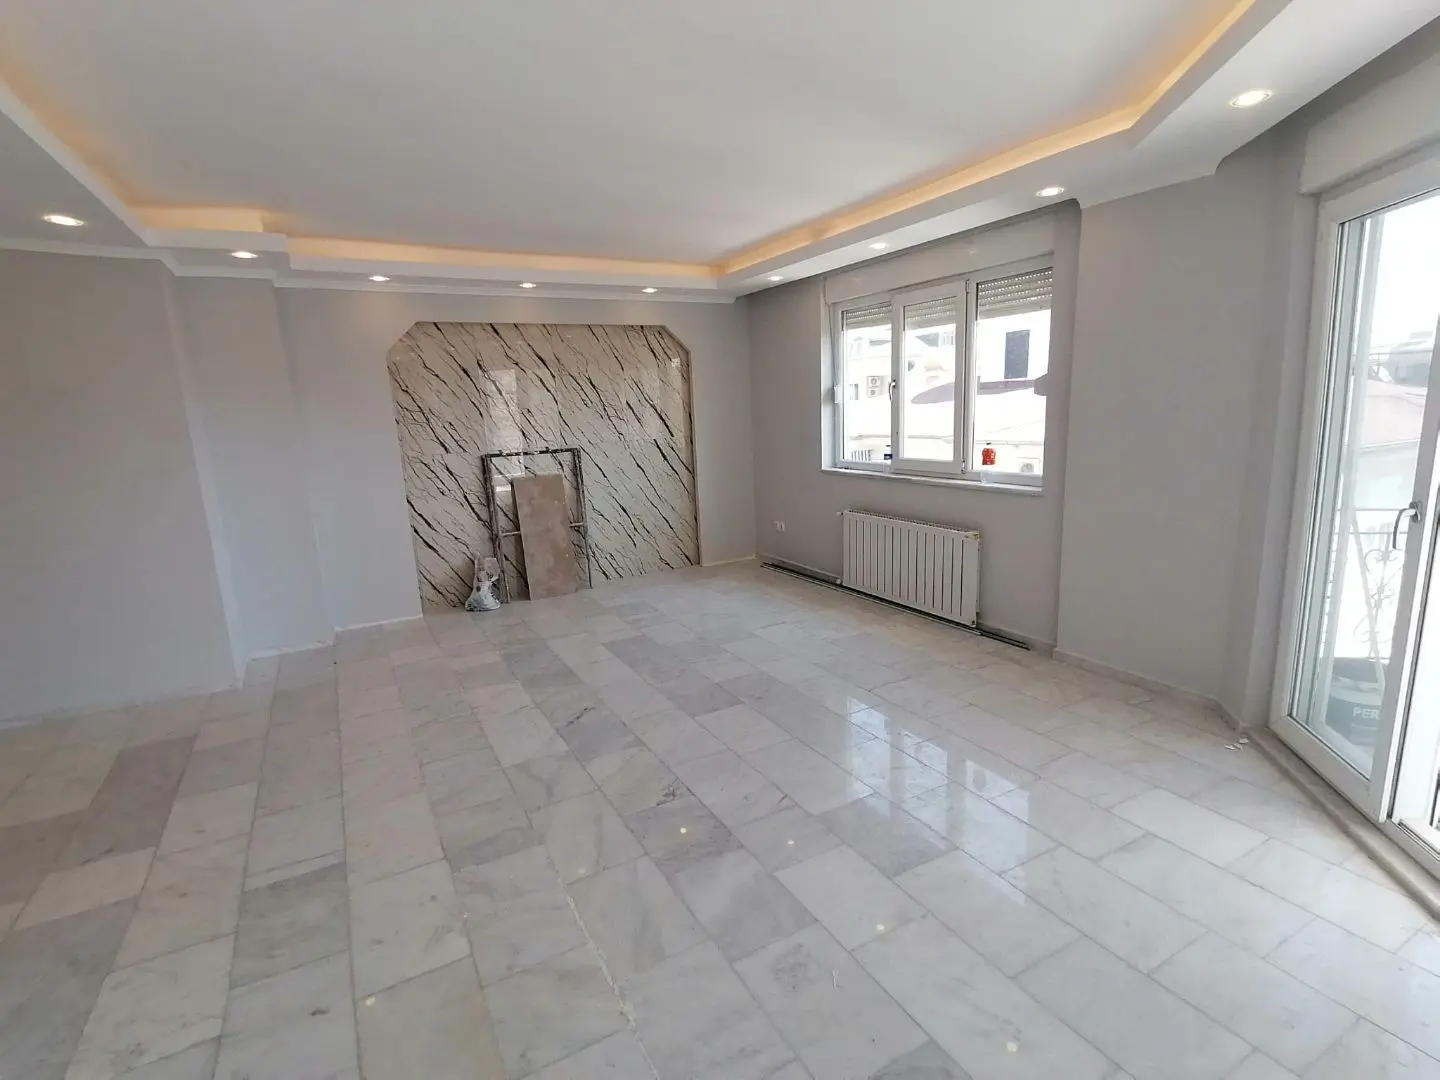 2+1 LARGE FLAT FOR SALE IN ALANYA CİKCİLLİ 120 M²